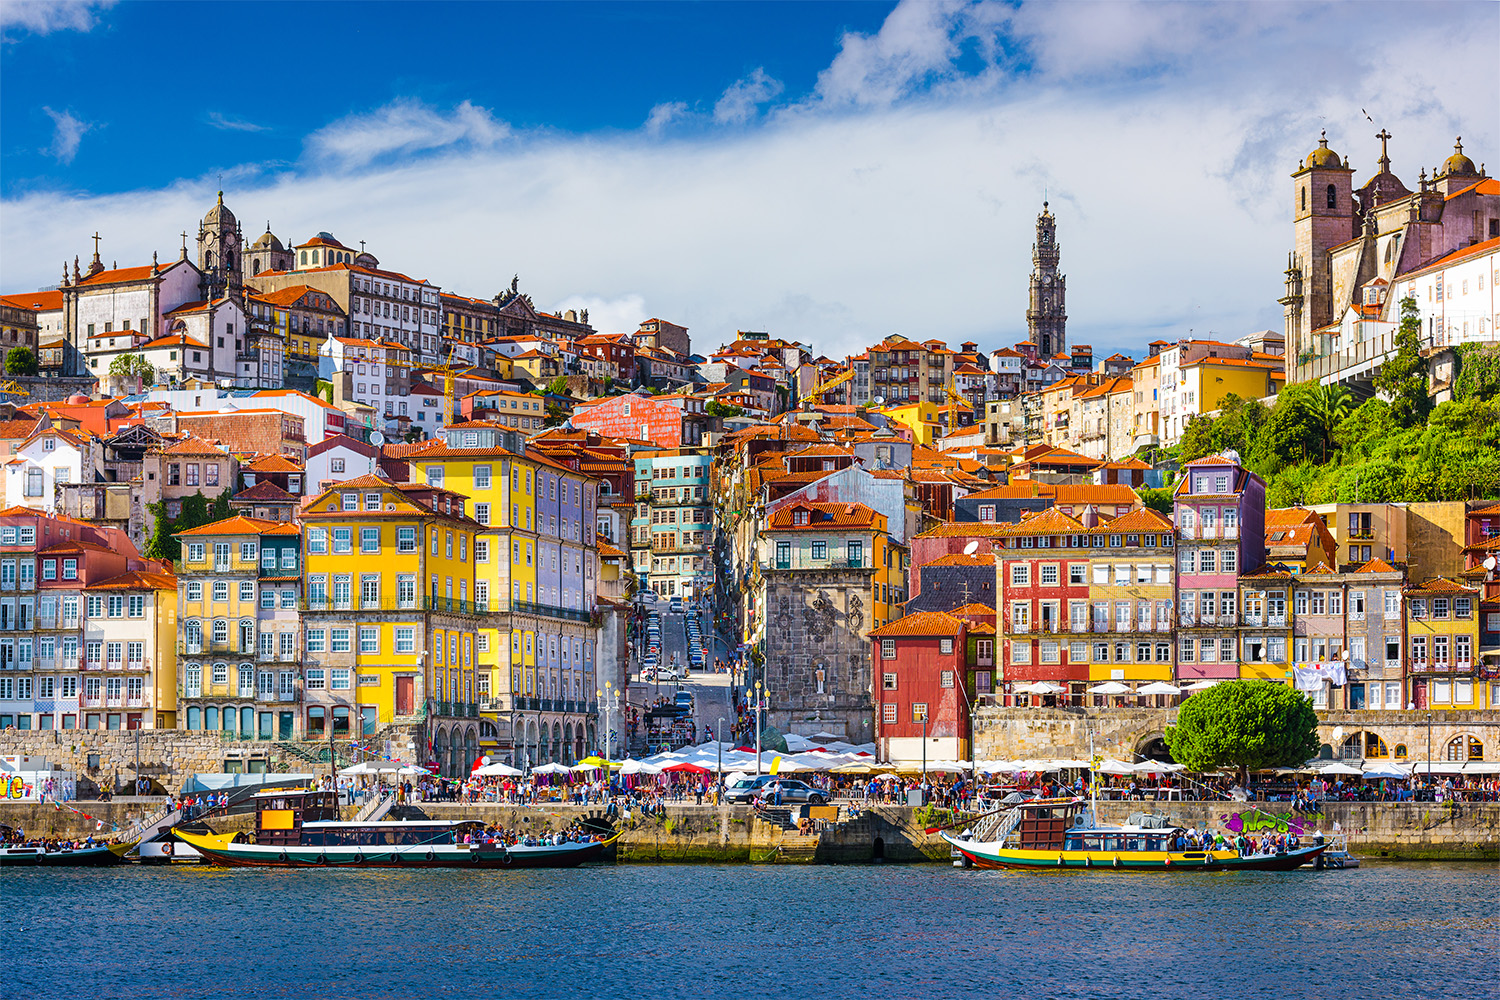 How To Apply for a Digital Nomad Visa in Portugal